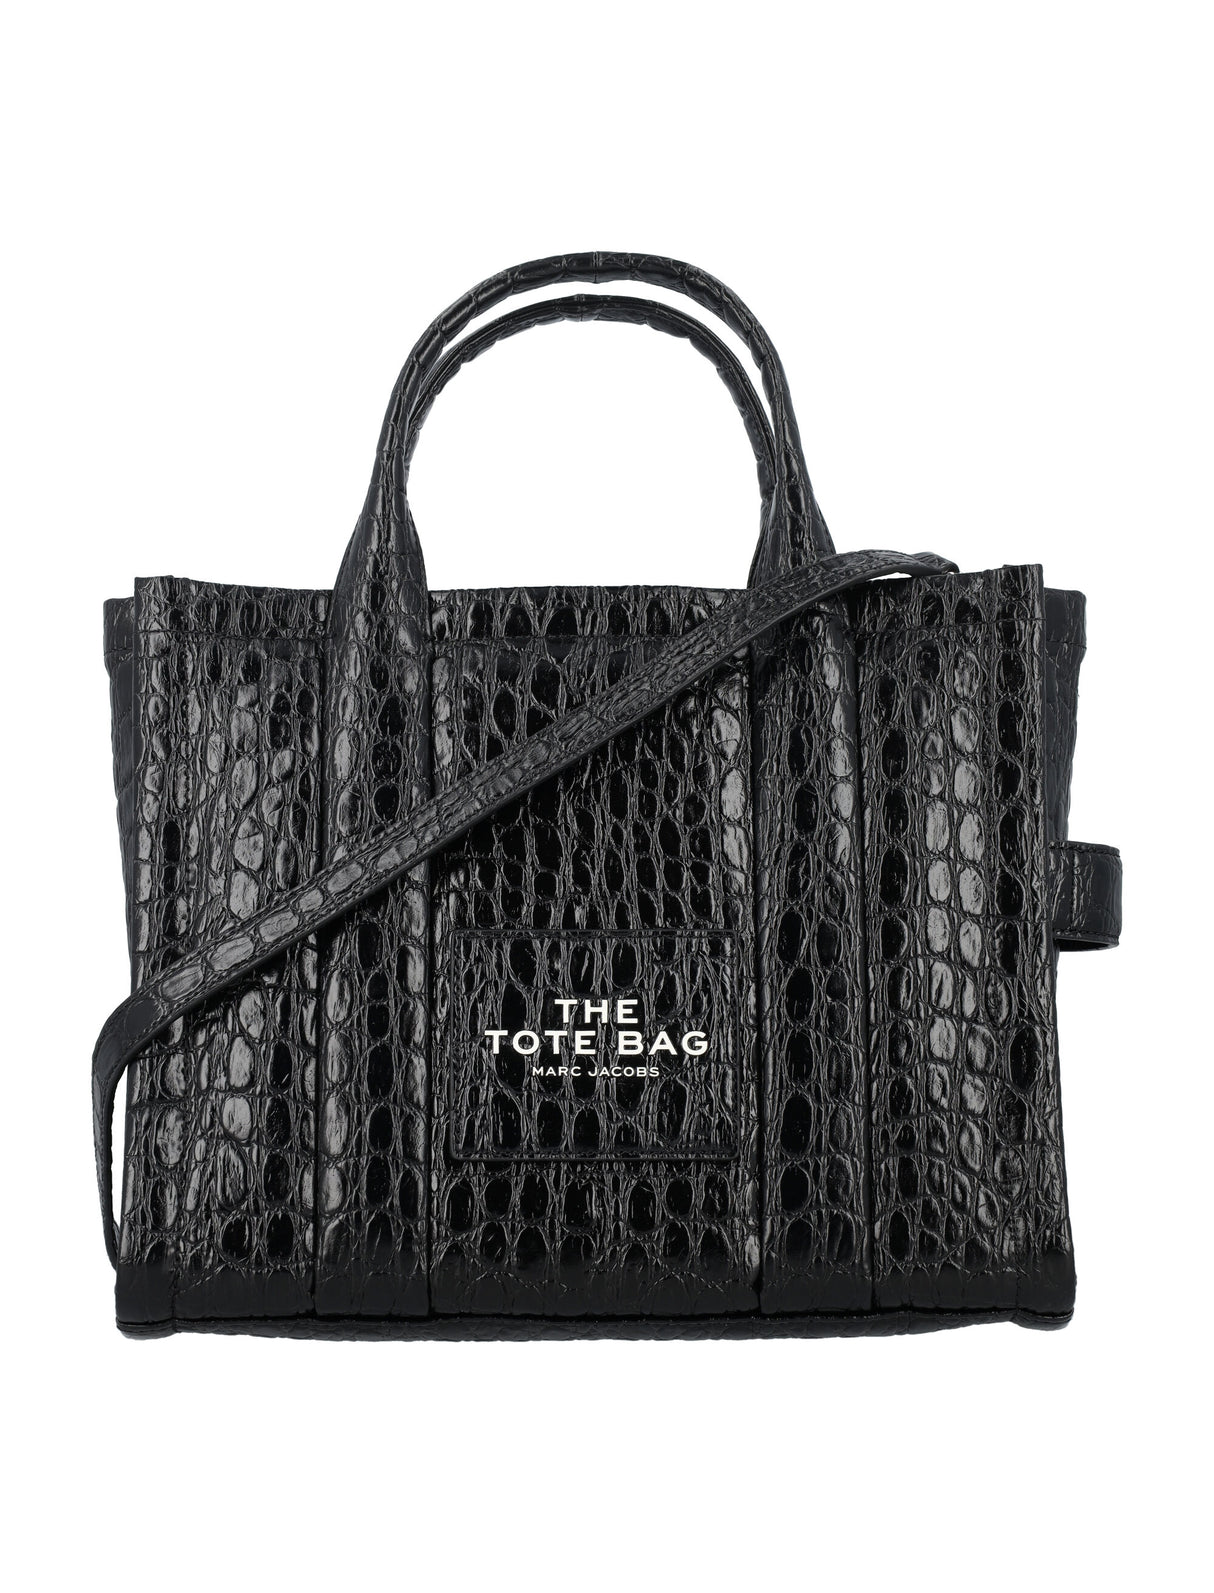 MARC JACOBS Glossy Black Croc-Embossed Leather Medium Tote with Adjustable Strap